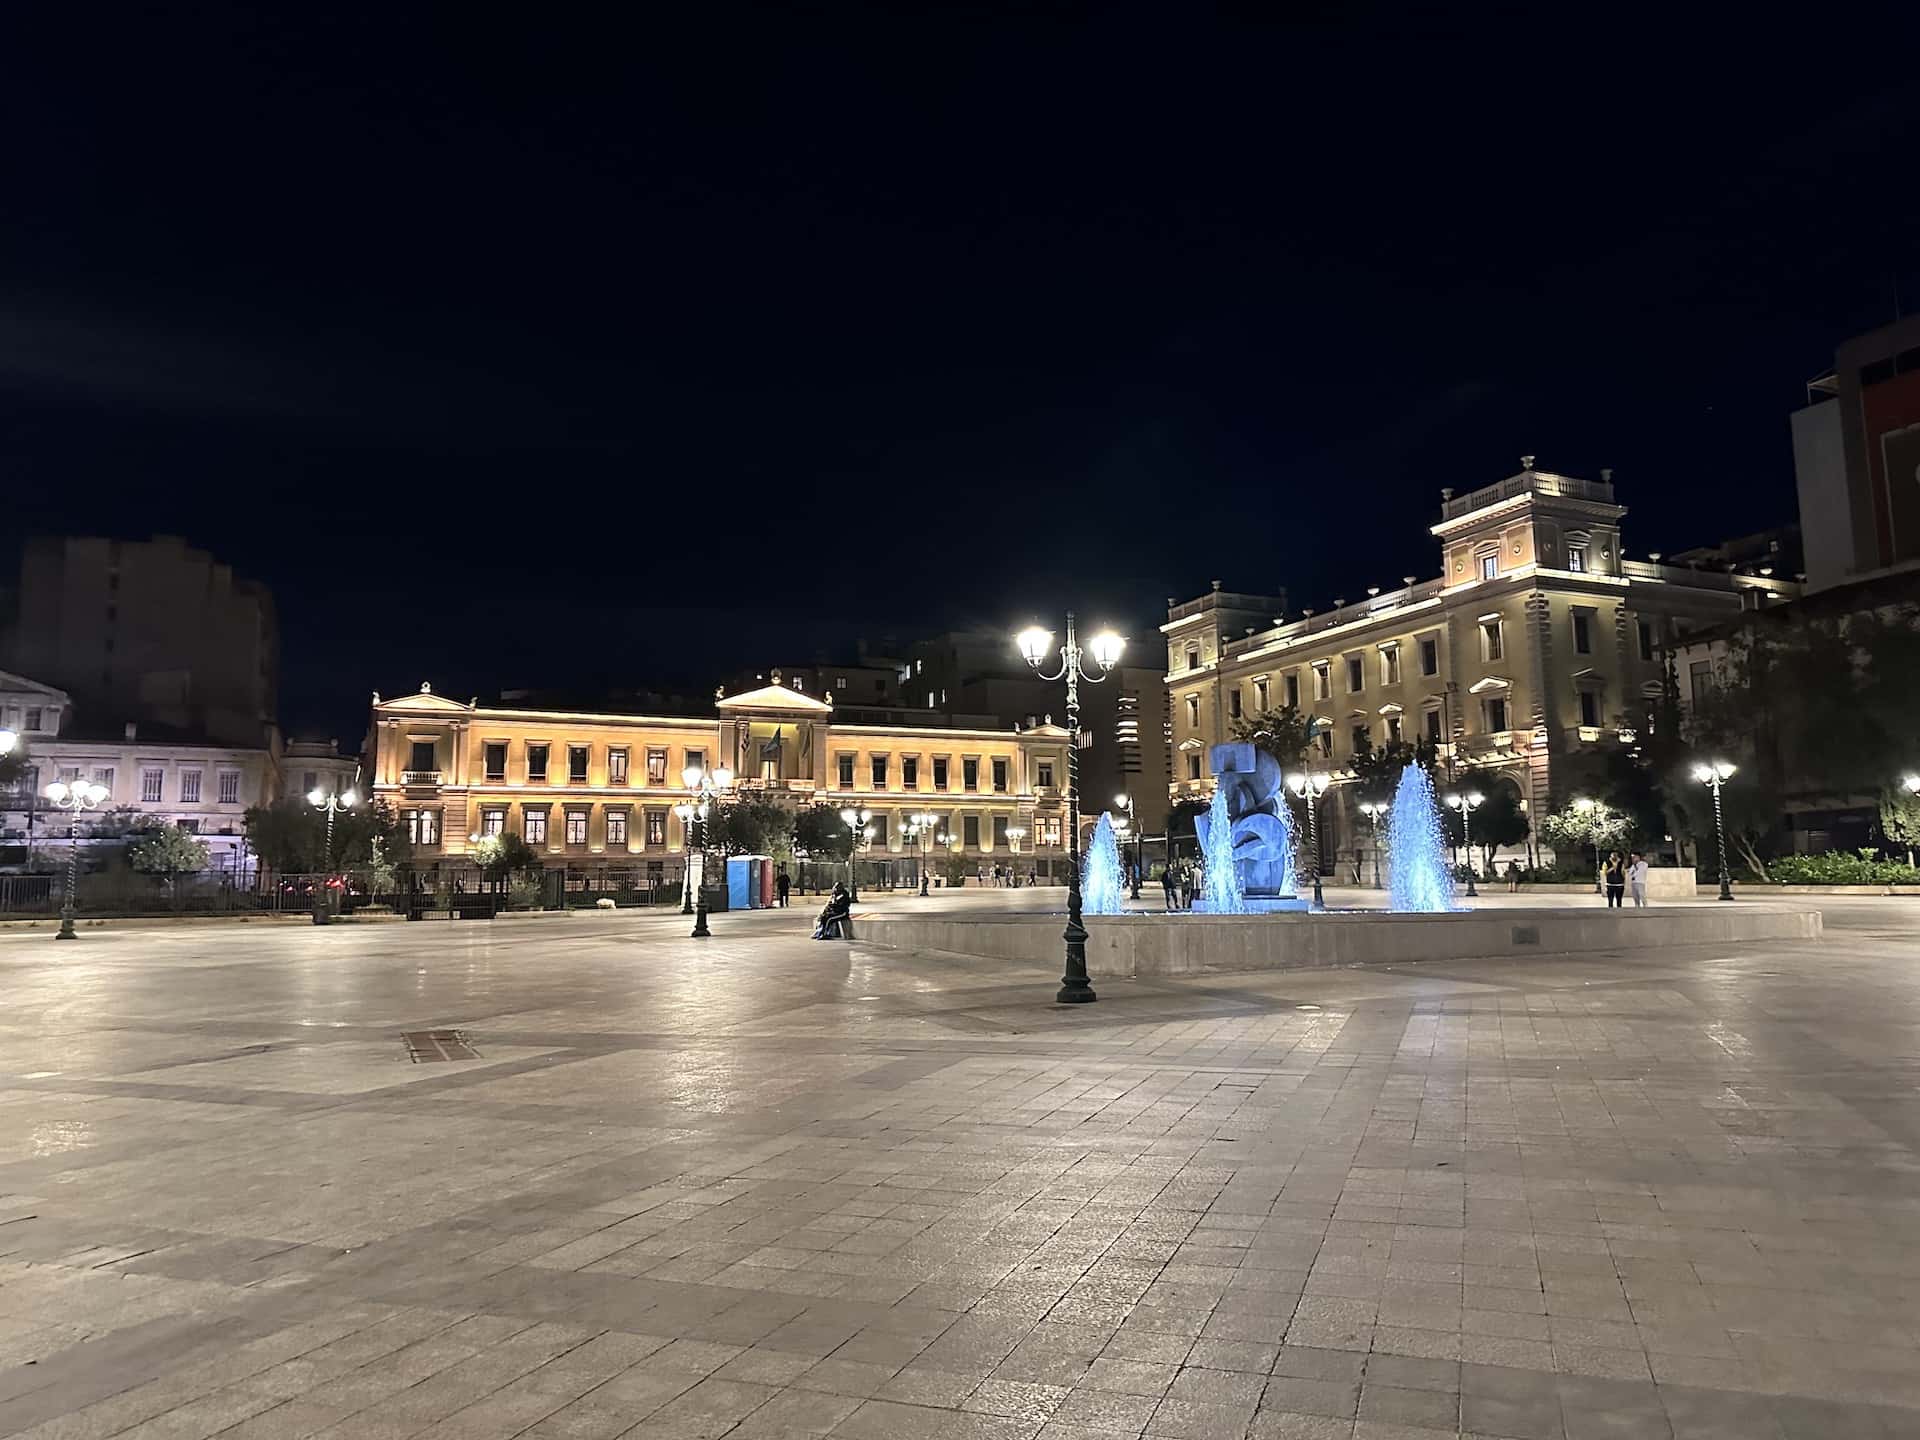 Kotzia Square at night in the Historic Center of Athens, Greece